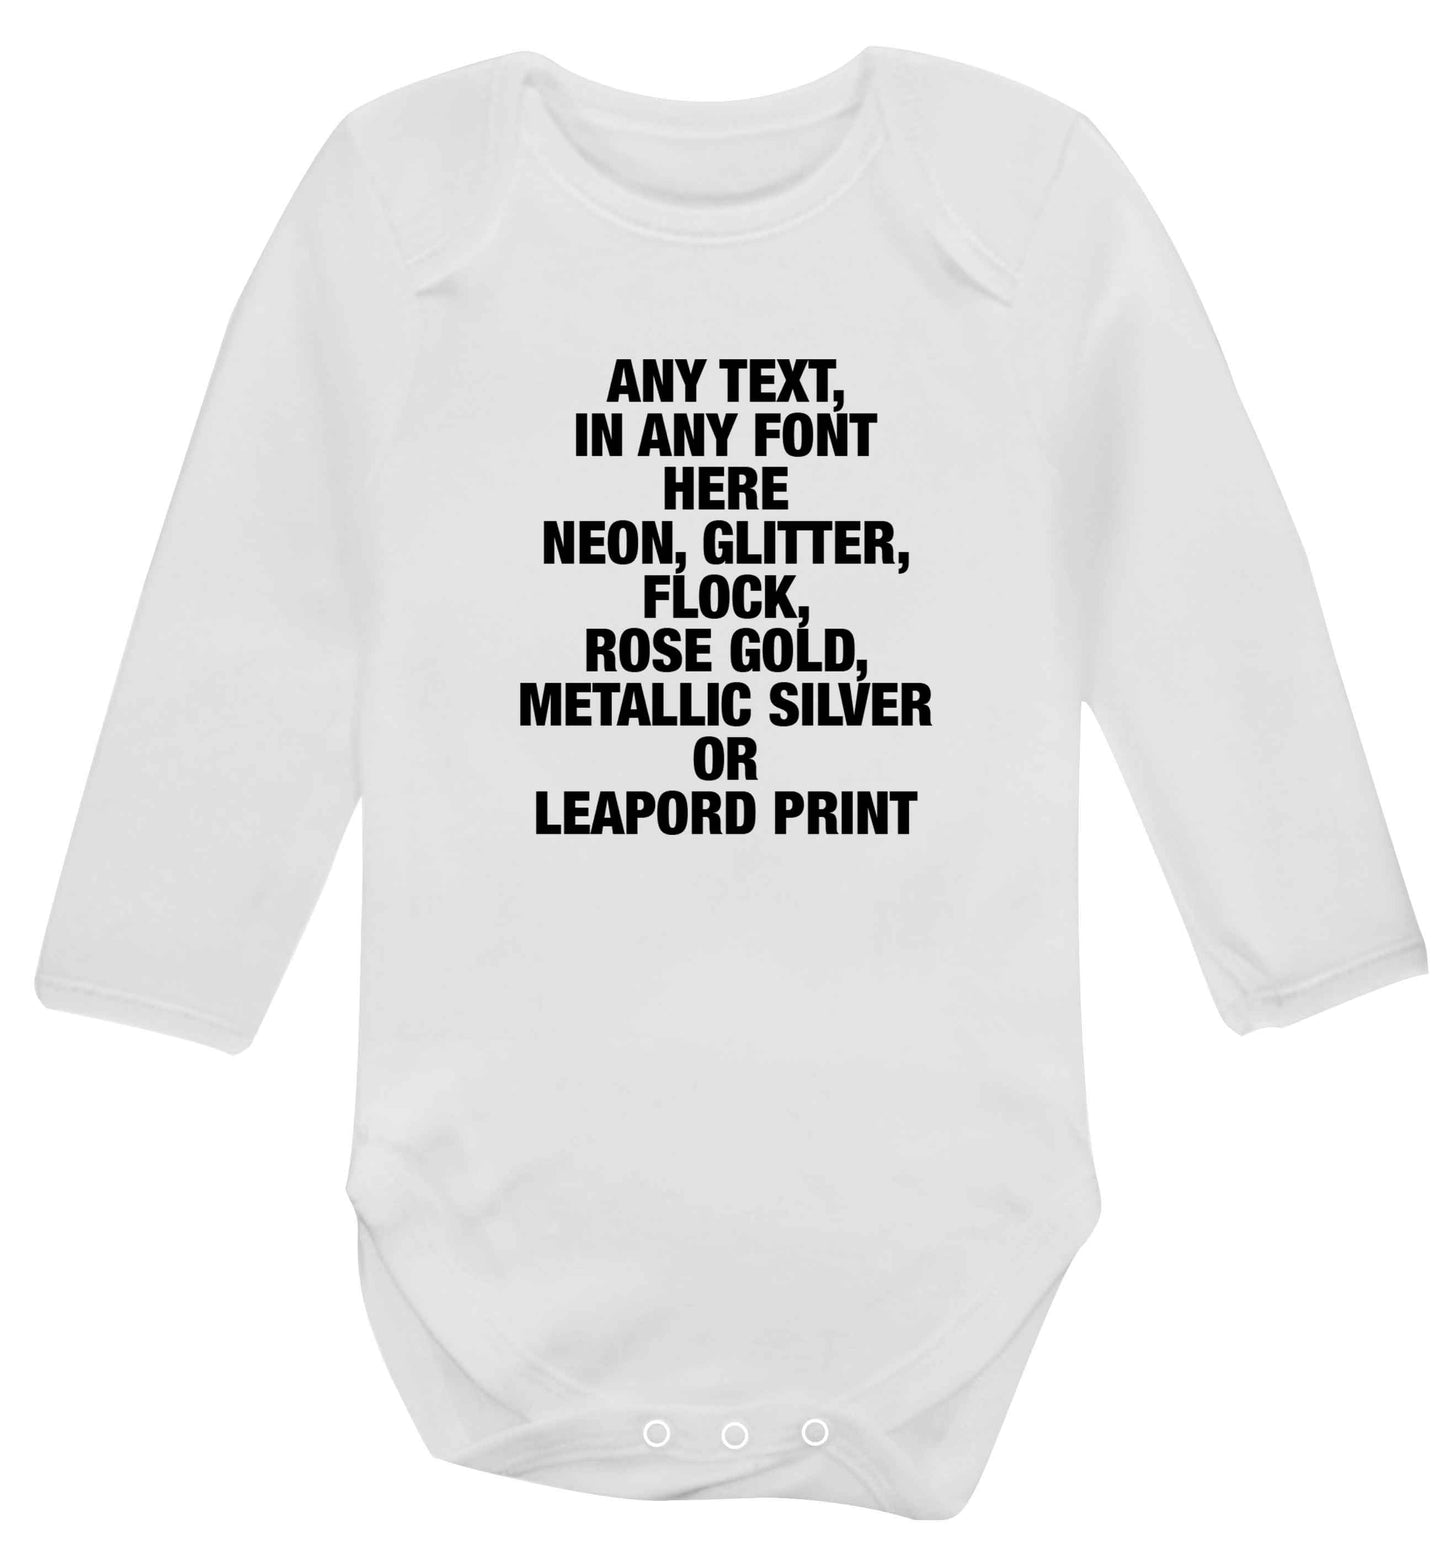 Premium custom order any text colour and font baby vest long sleeved white 6-12 months